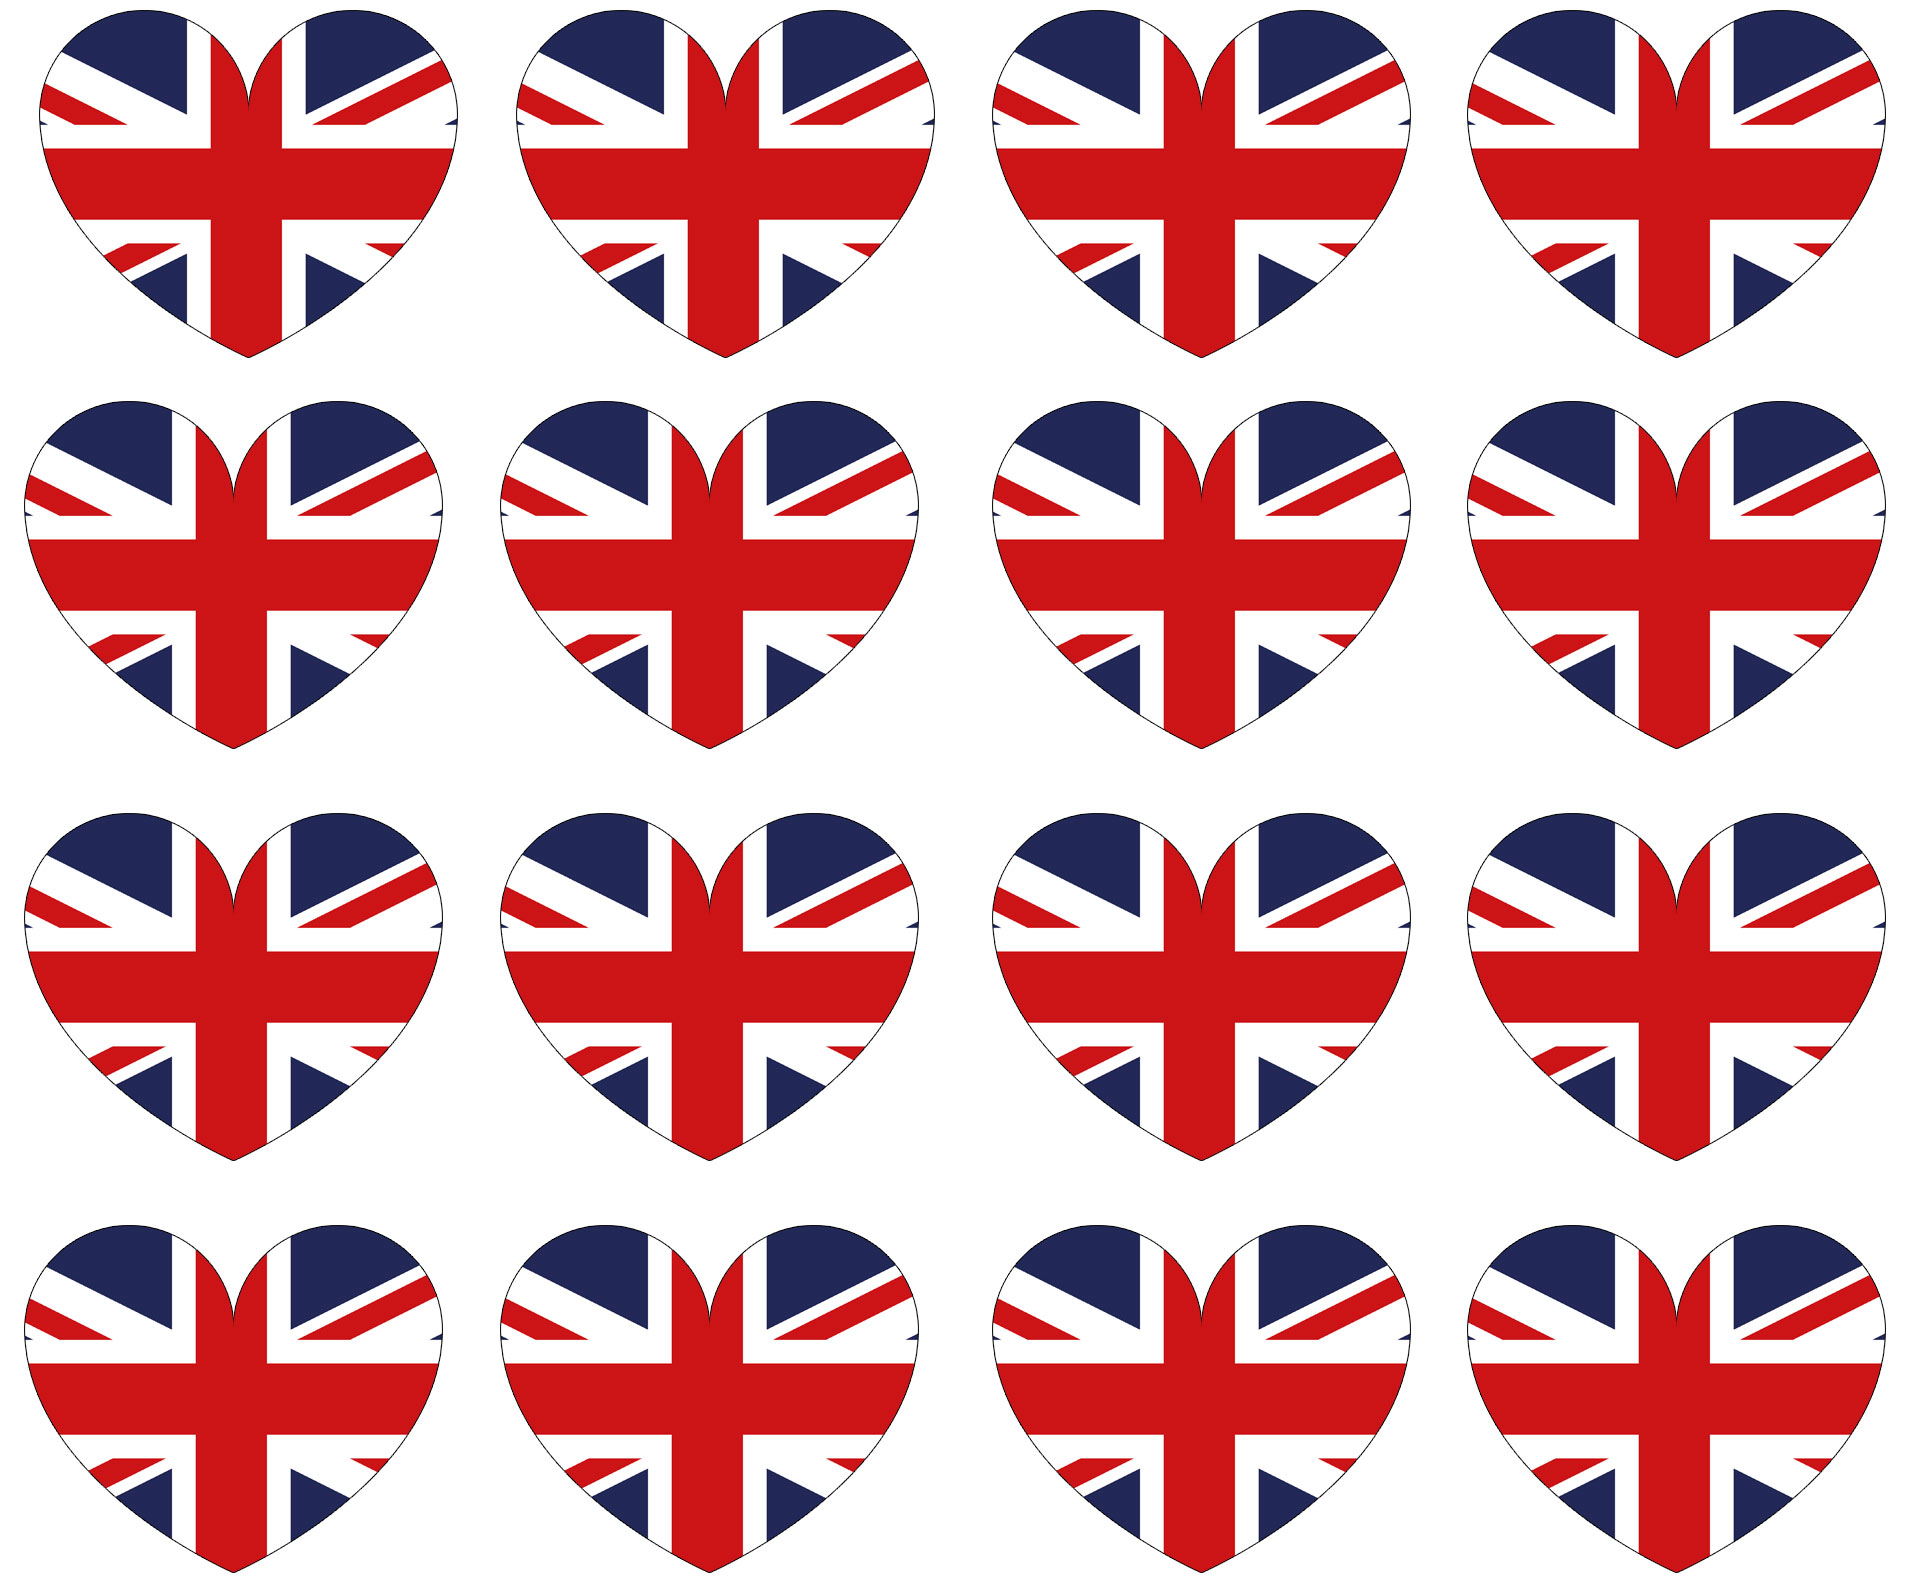 Printable page of small UK flag hearts for crafting and decorating